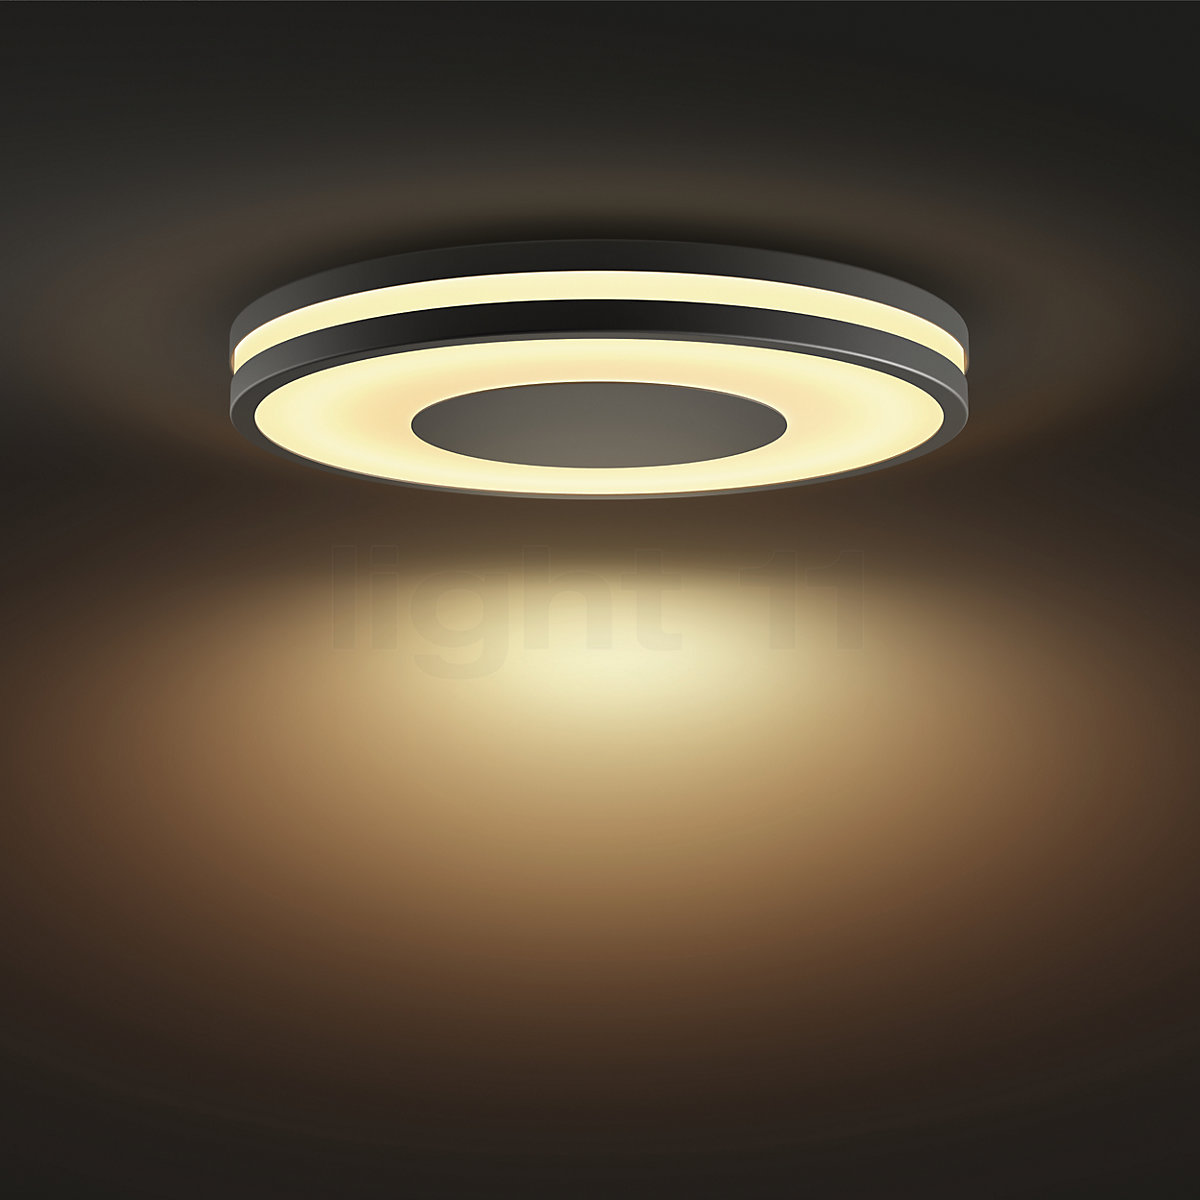 Buy Philips Hue White Ceiling Light LED with dimmer switch at